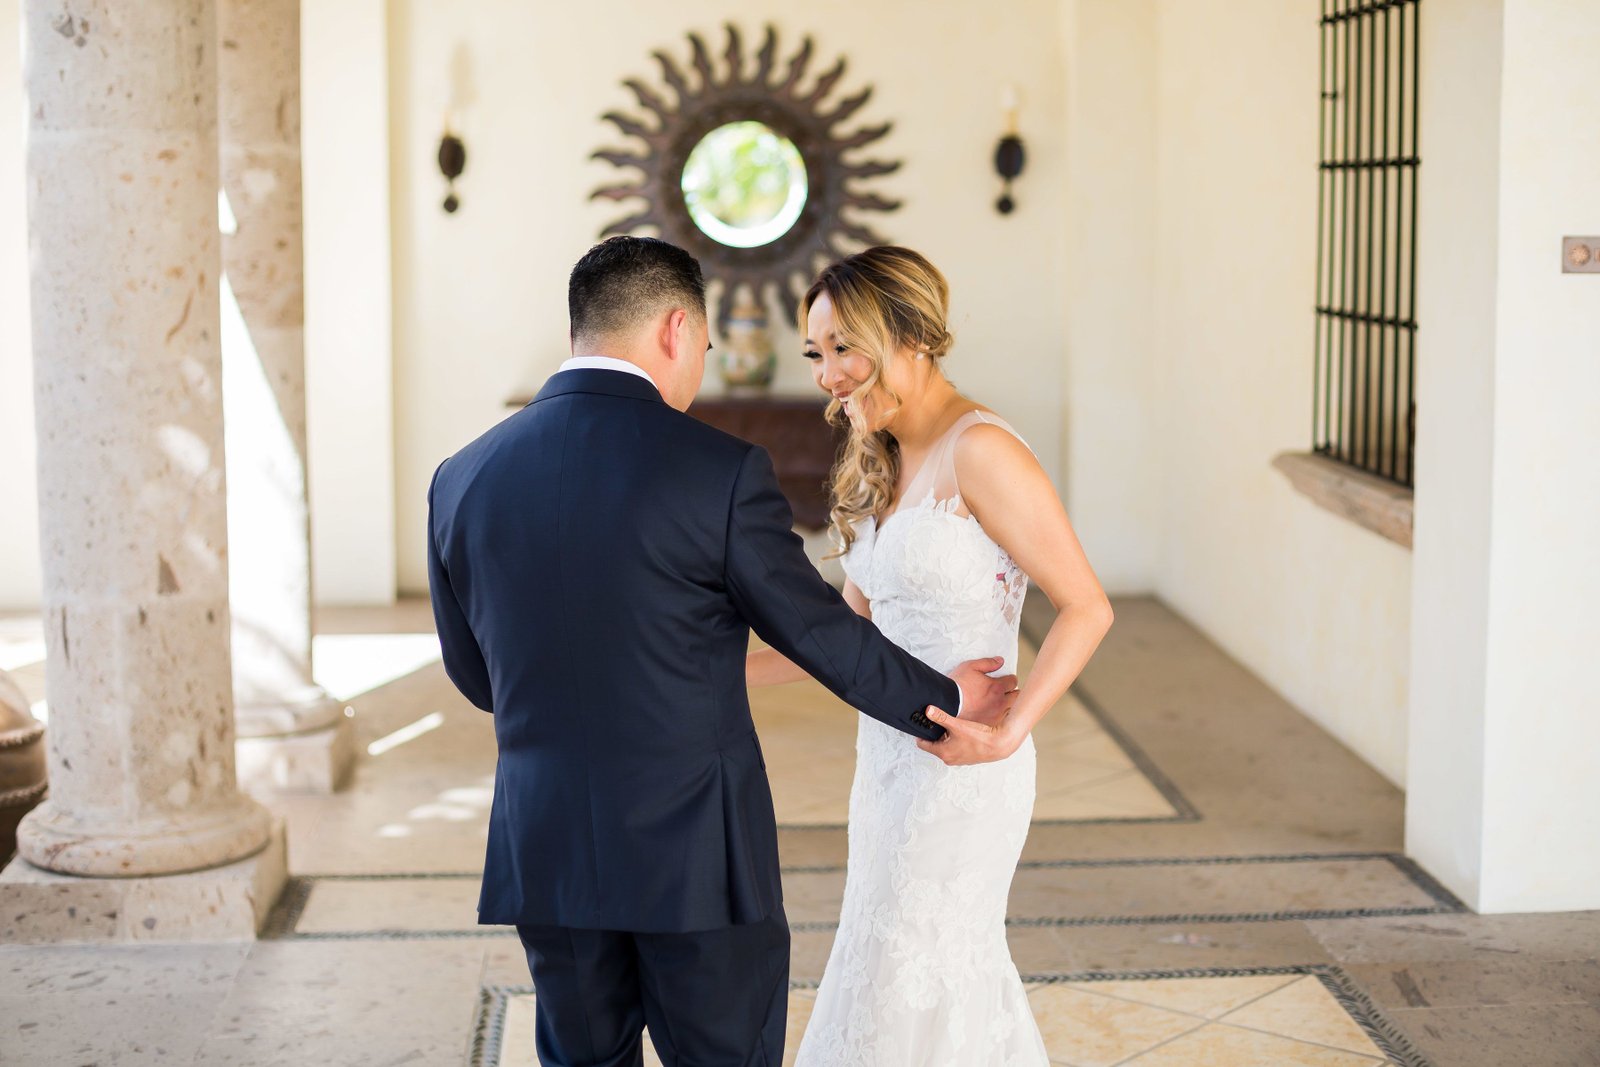 Groom seeing the Bride for the First Time before the Ceremony doing their First Look. The Wedding Venue is at Cabo del Sol, located in Cabo San Lucas Mexico. Wedding Planning by Cabo Wedding Services. The Photographers were Ana and Jerome